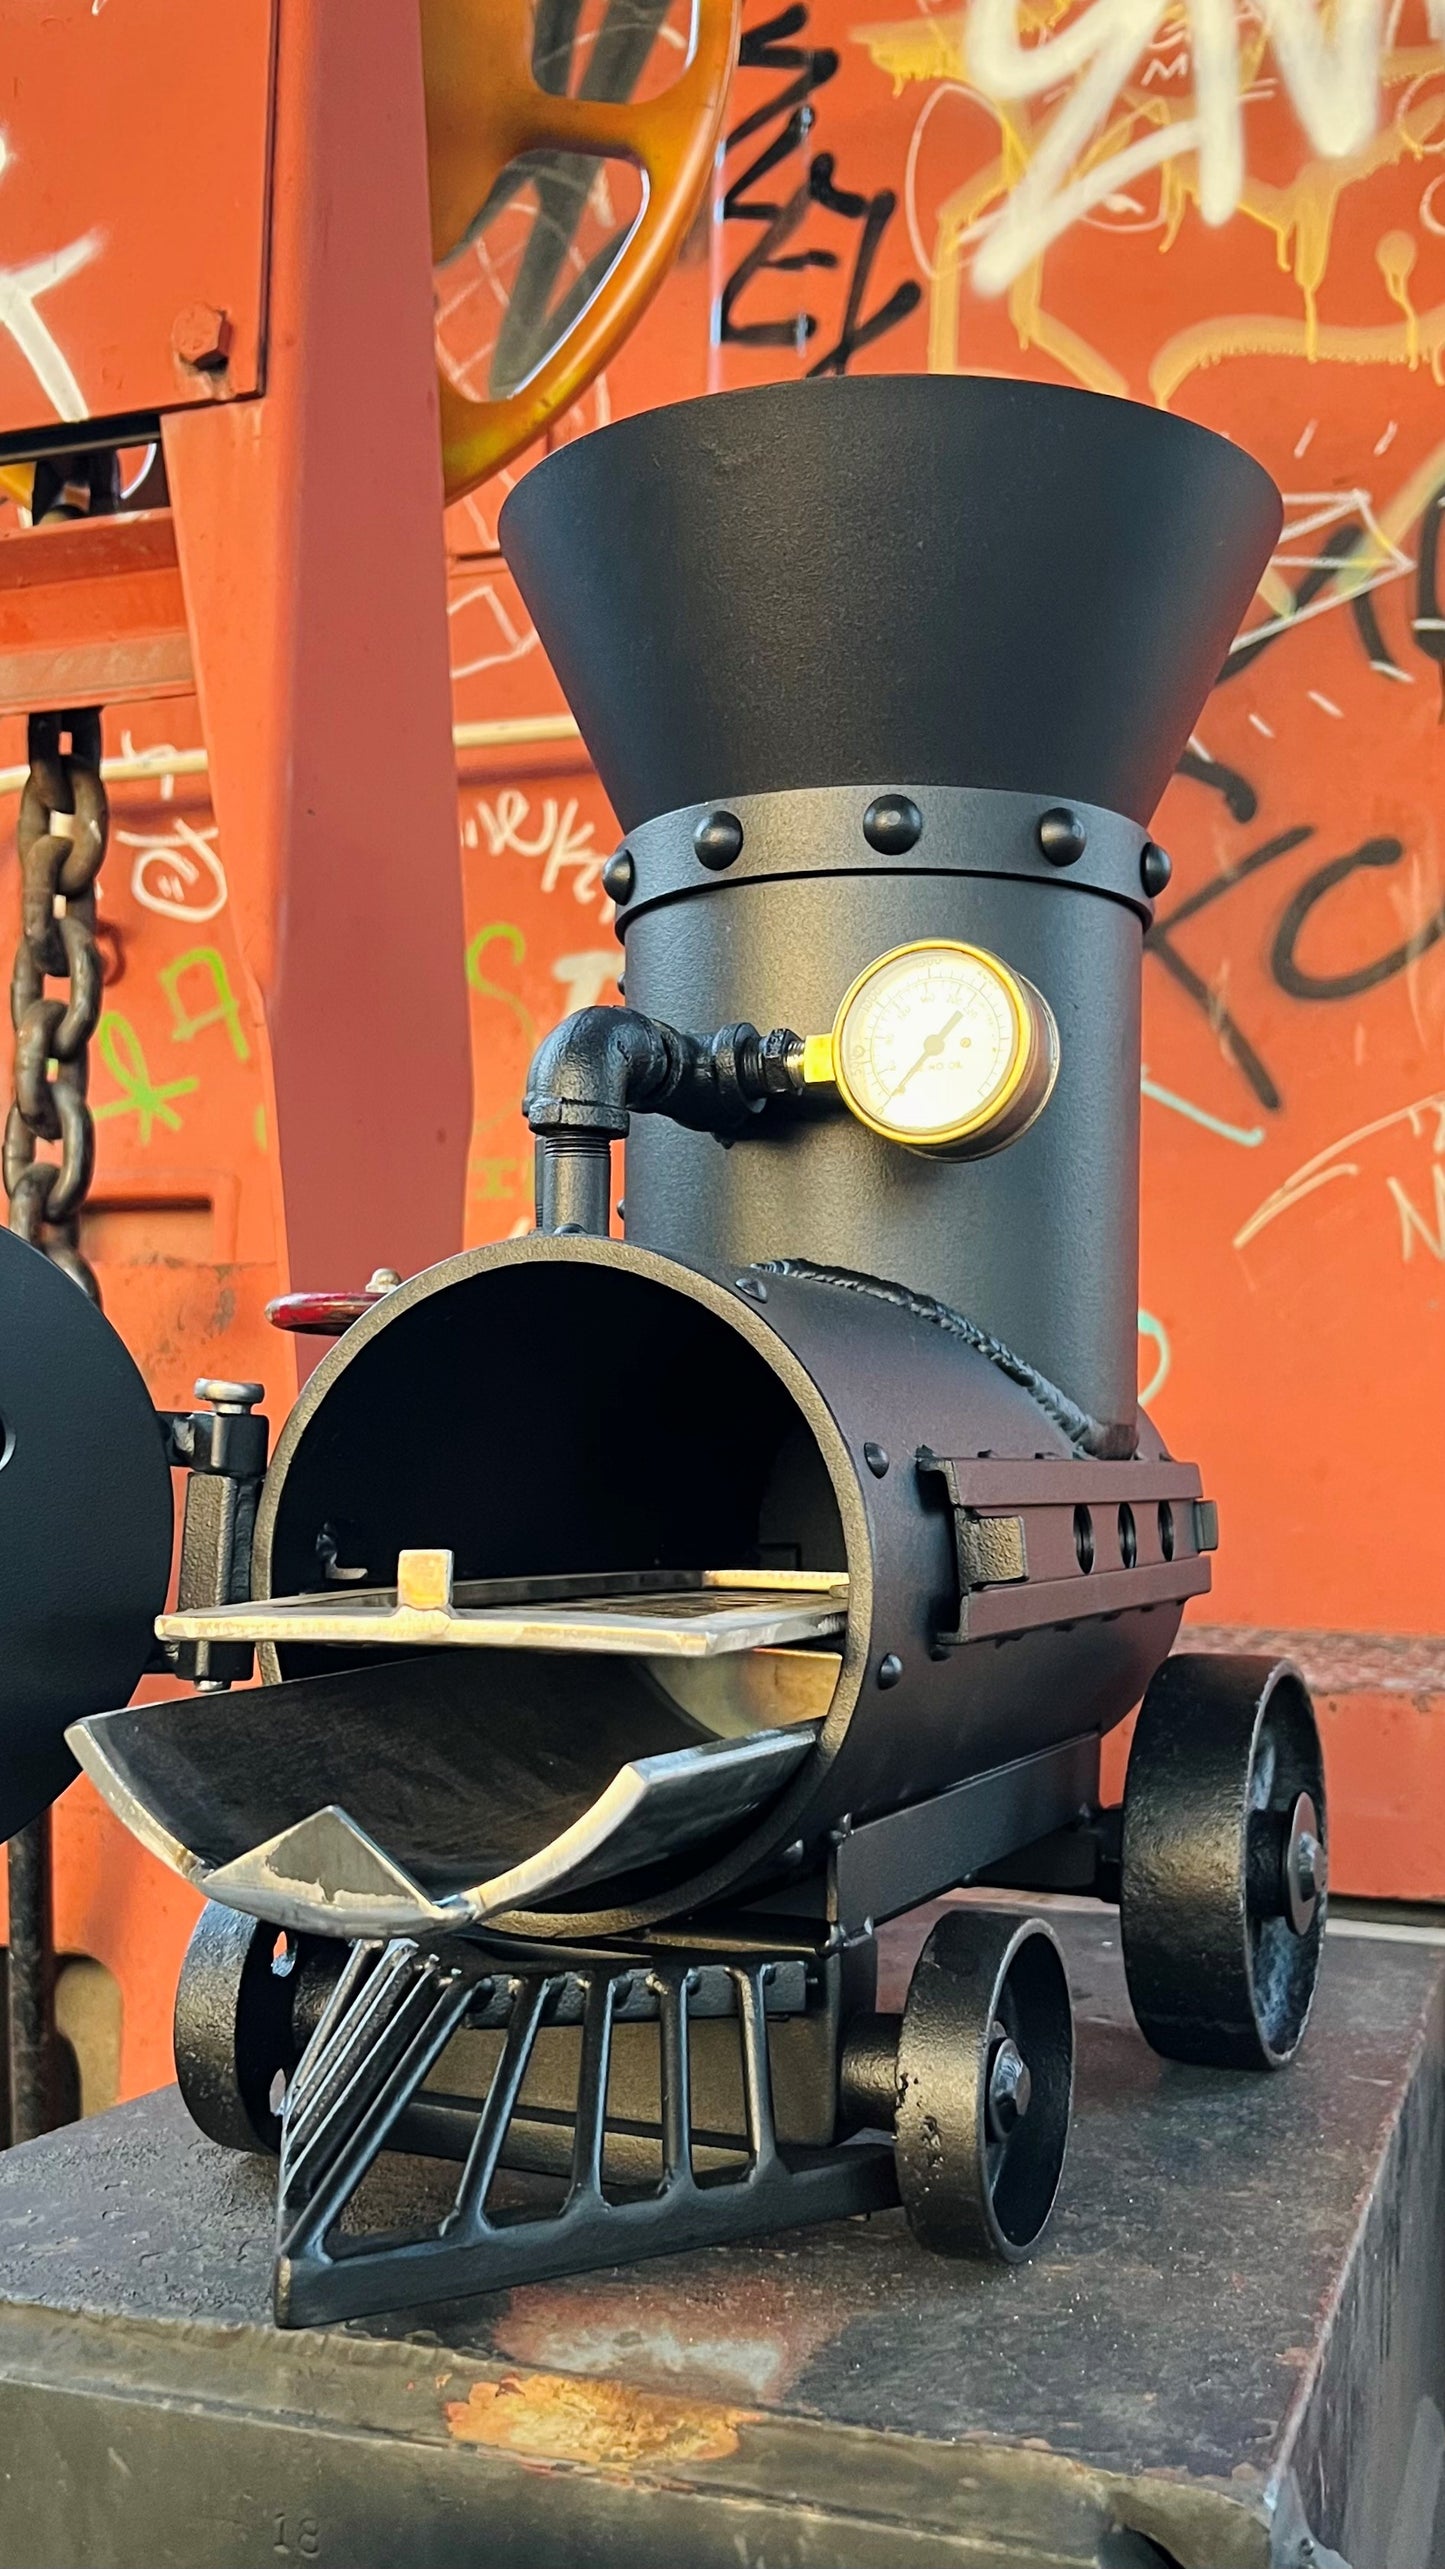 LOCOMOTIVE ROCKET STOVE grill bbq fire pit cooking